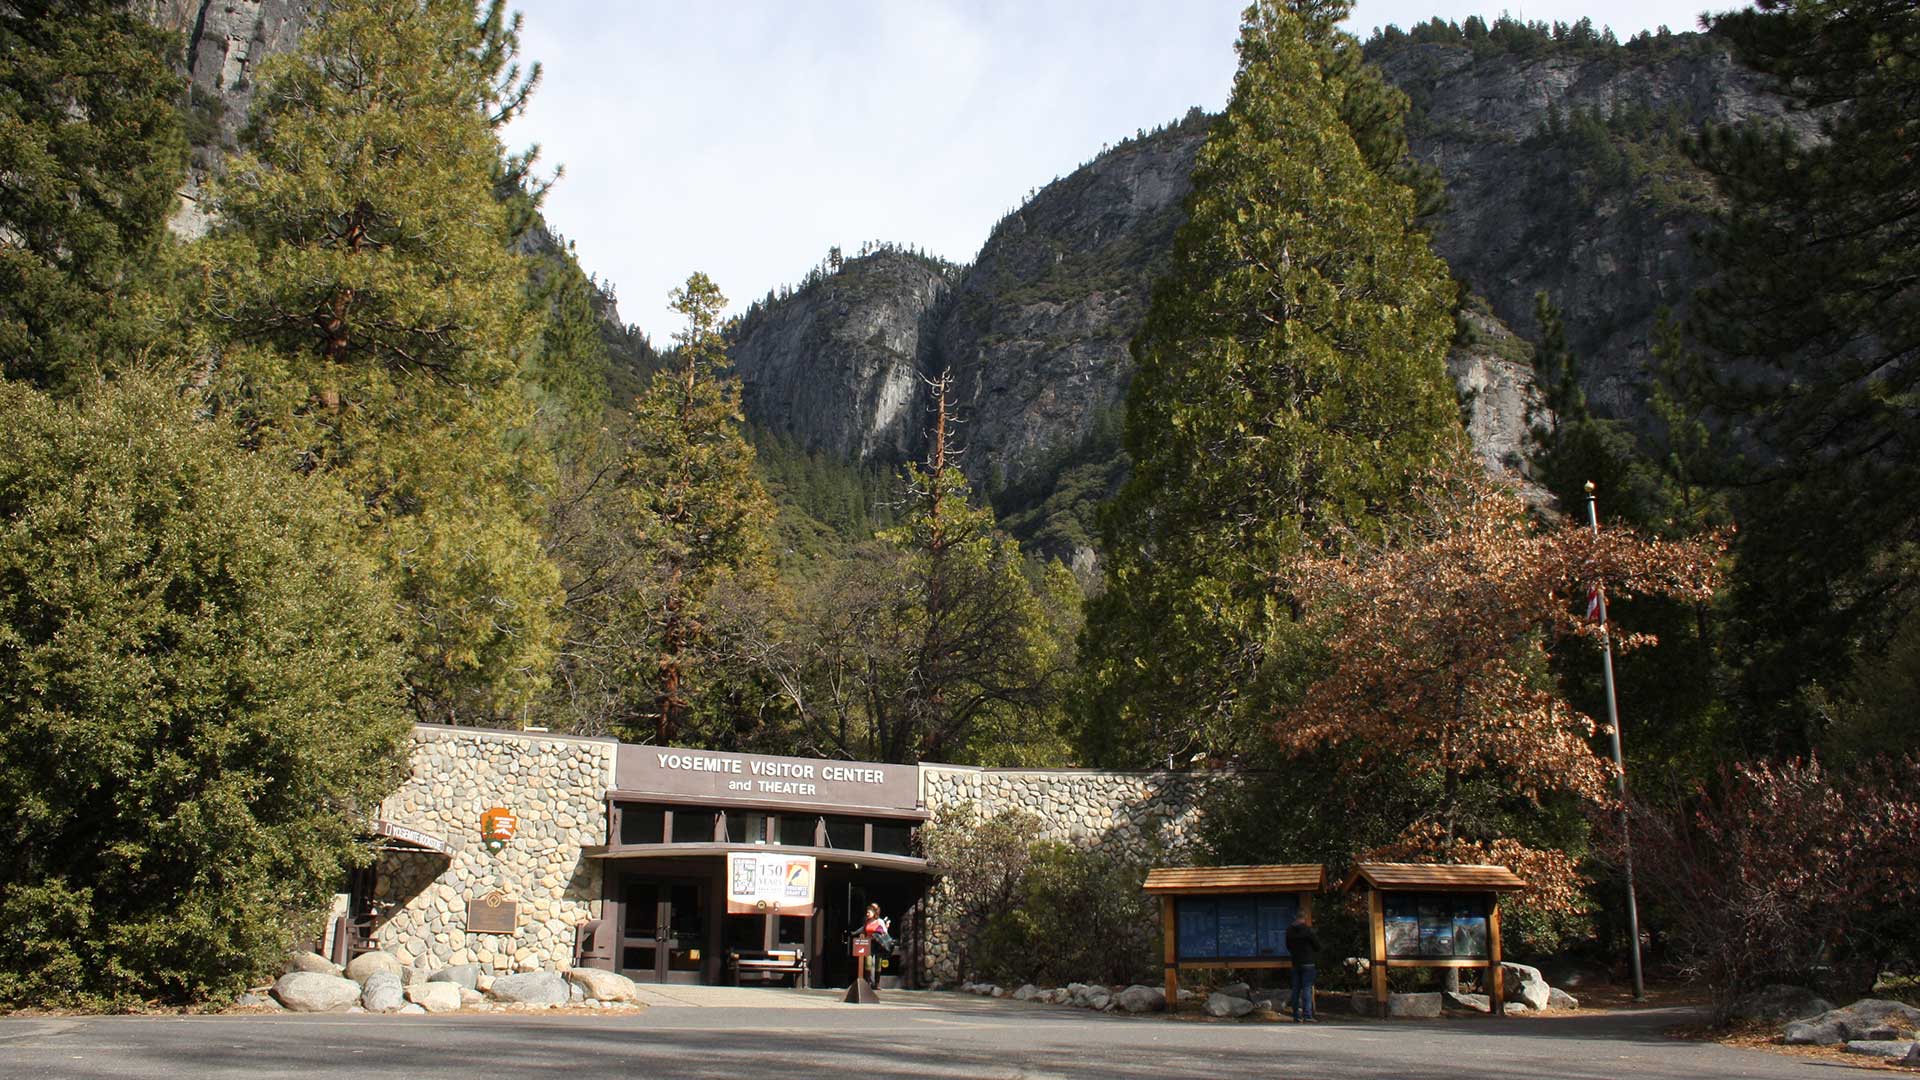 Interpretive signs in front of Yosemite Valley Visitor Center